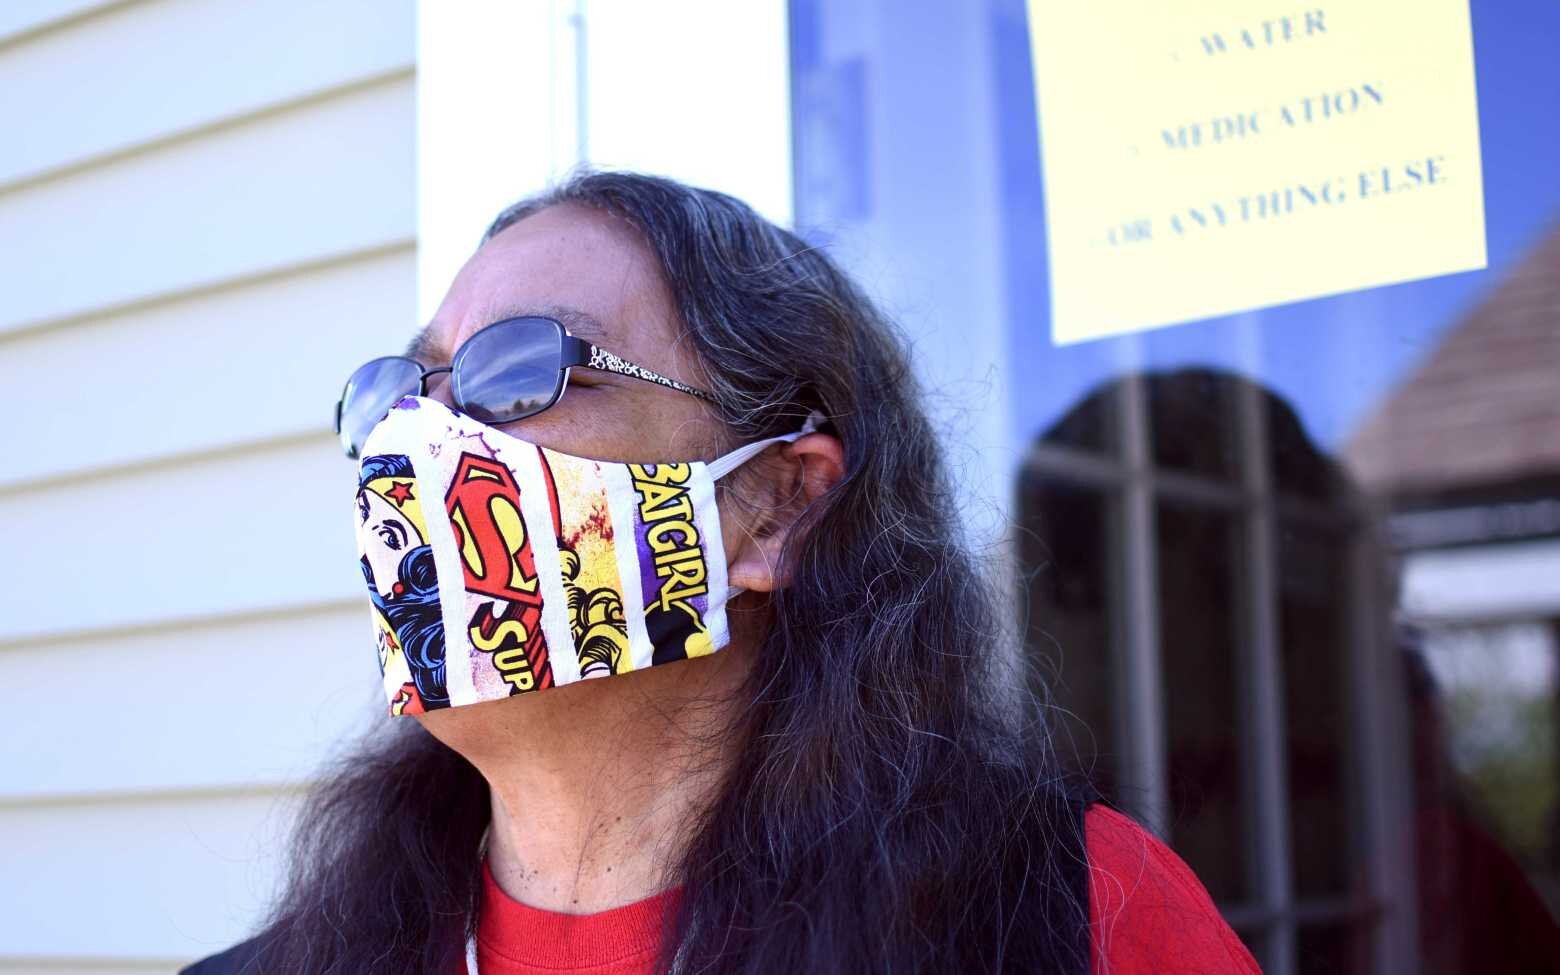 Why colored paper in a doorway is a key part of Maine tribes’ coronavirus response